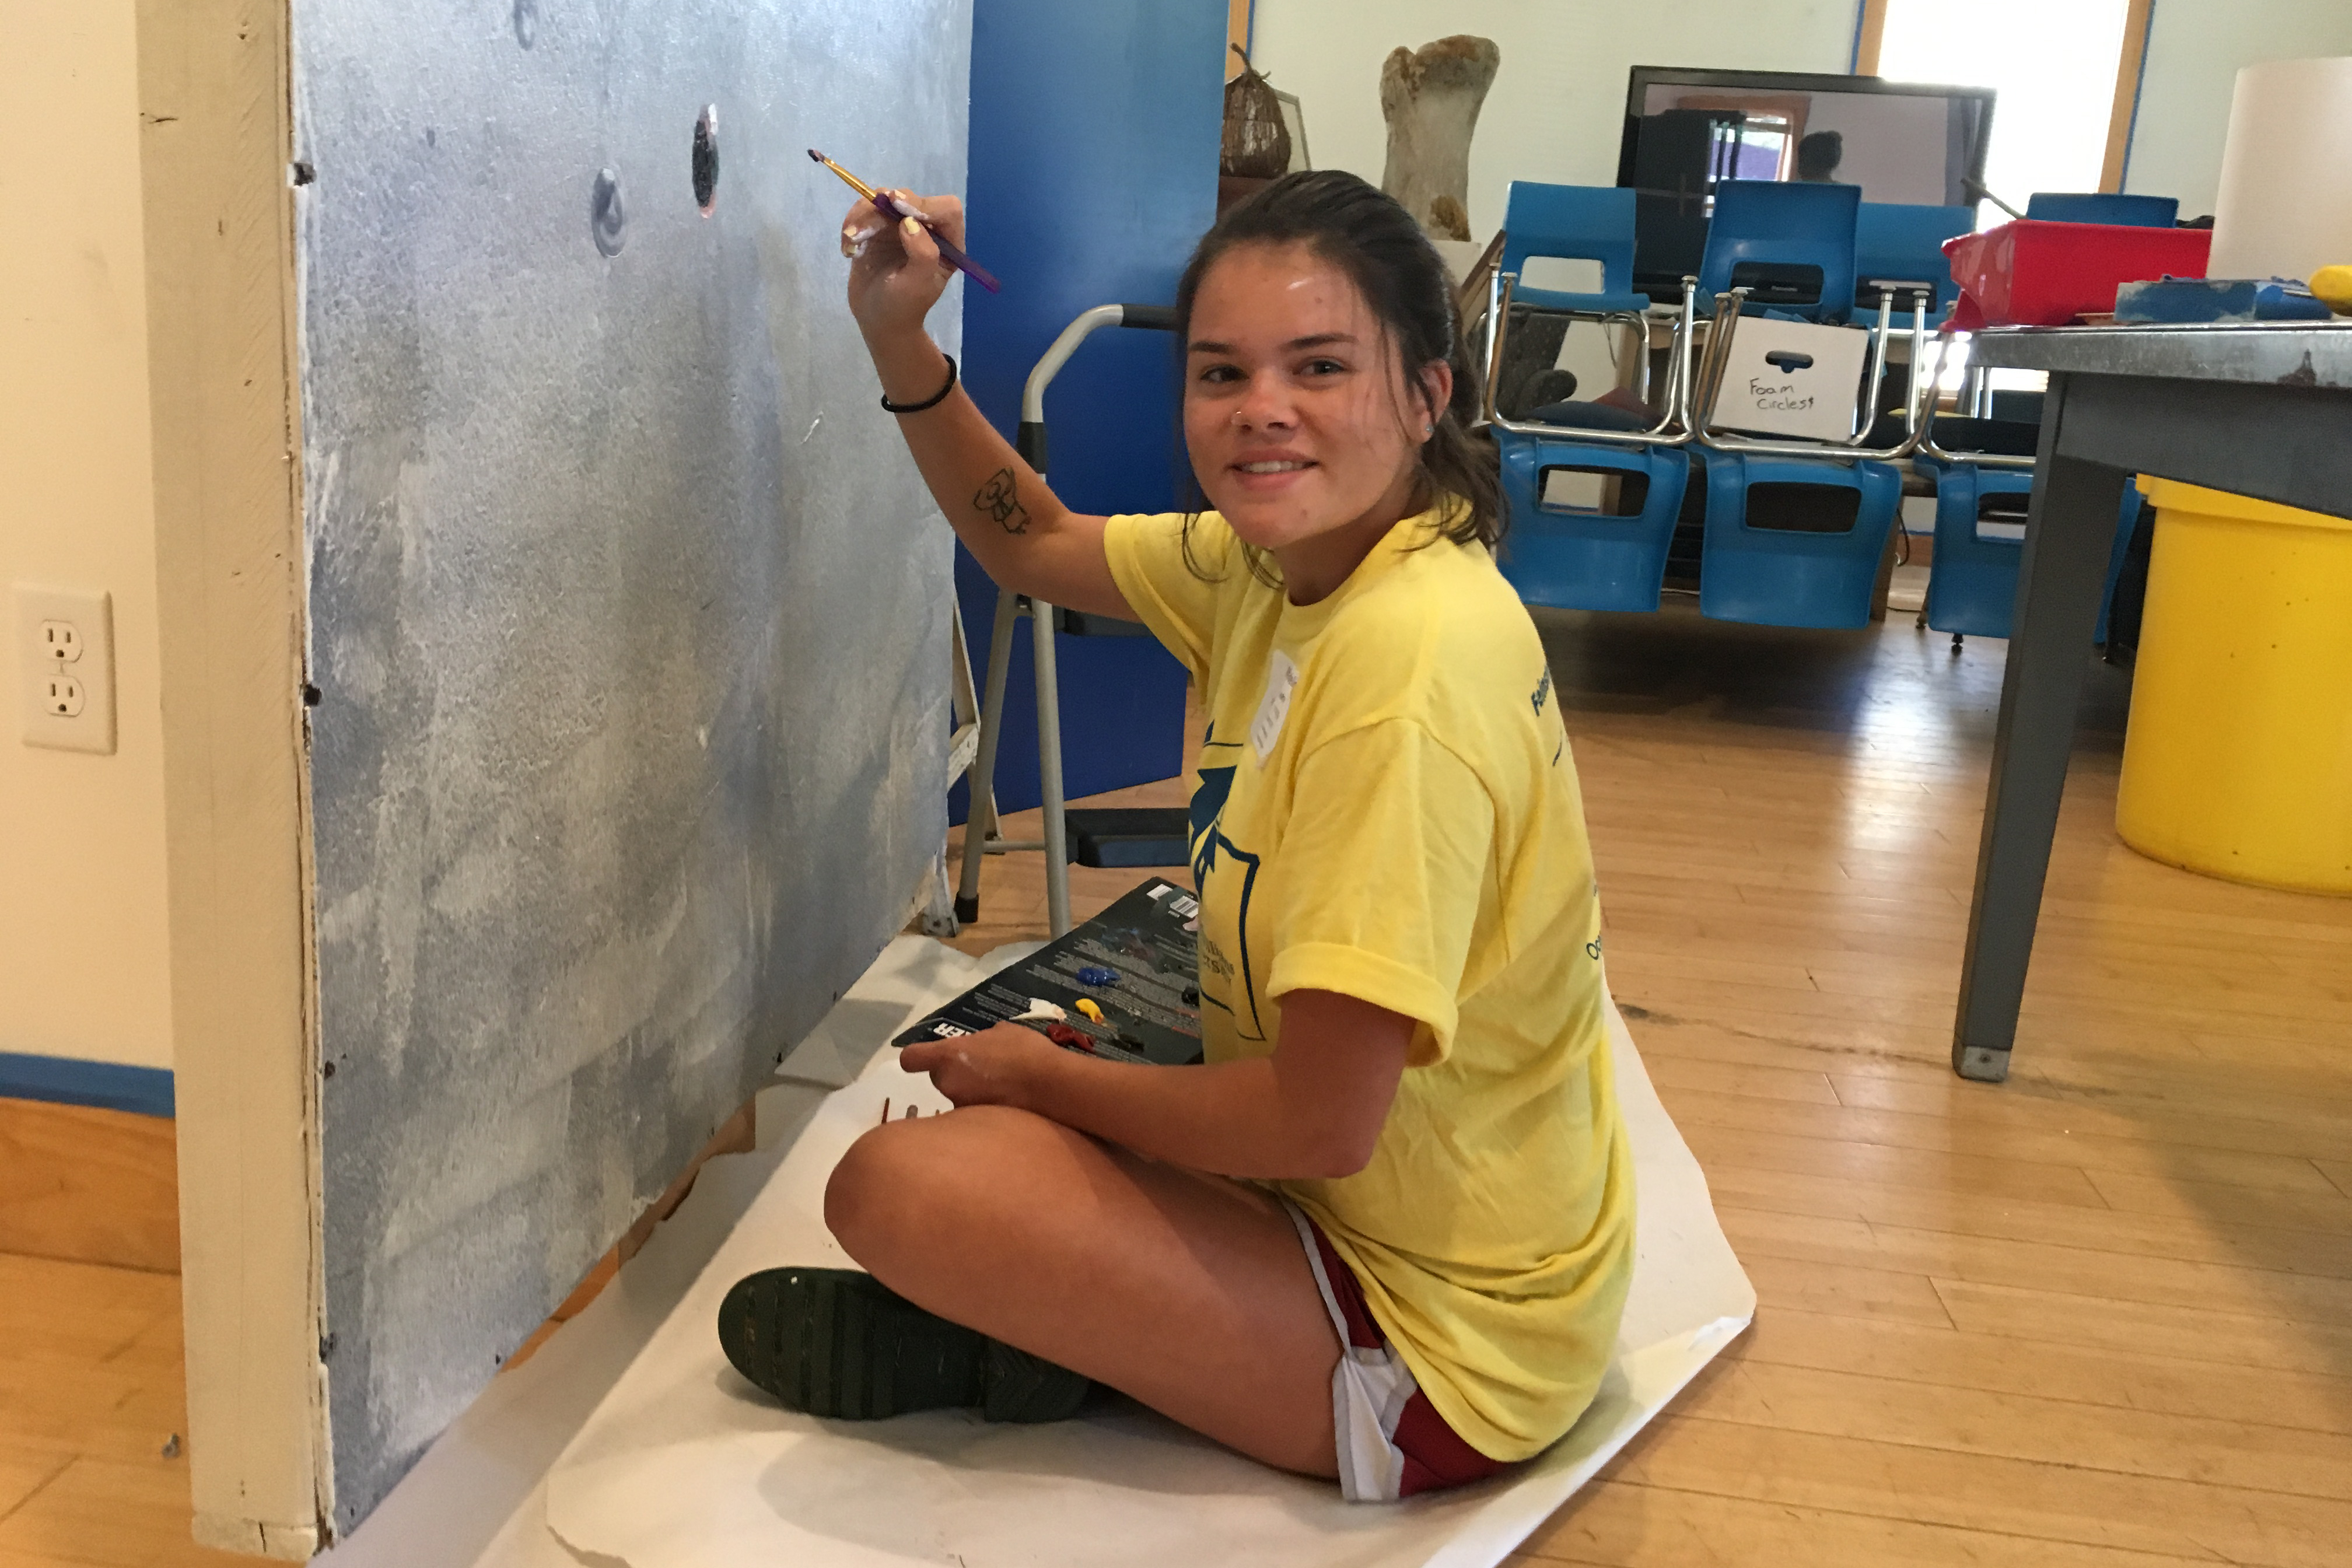 Student paints a mural on wall